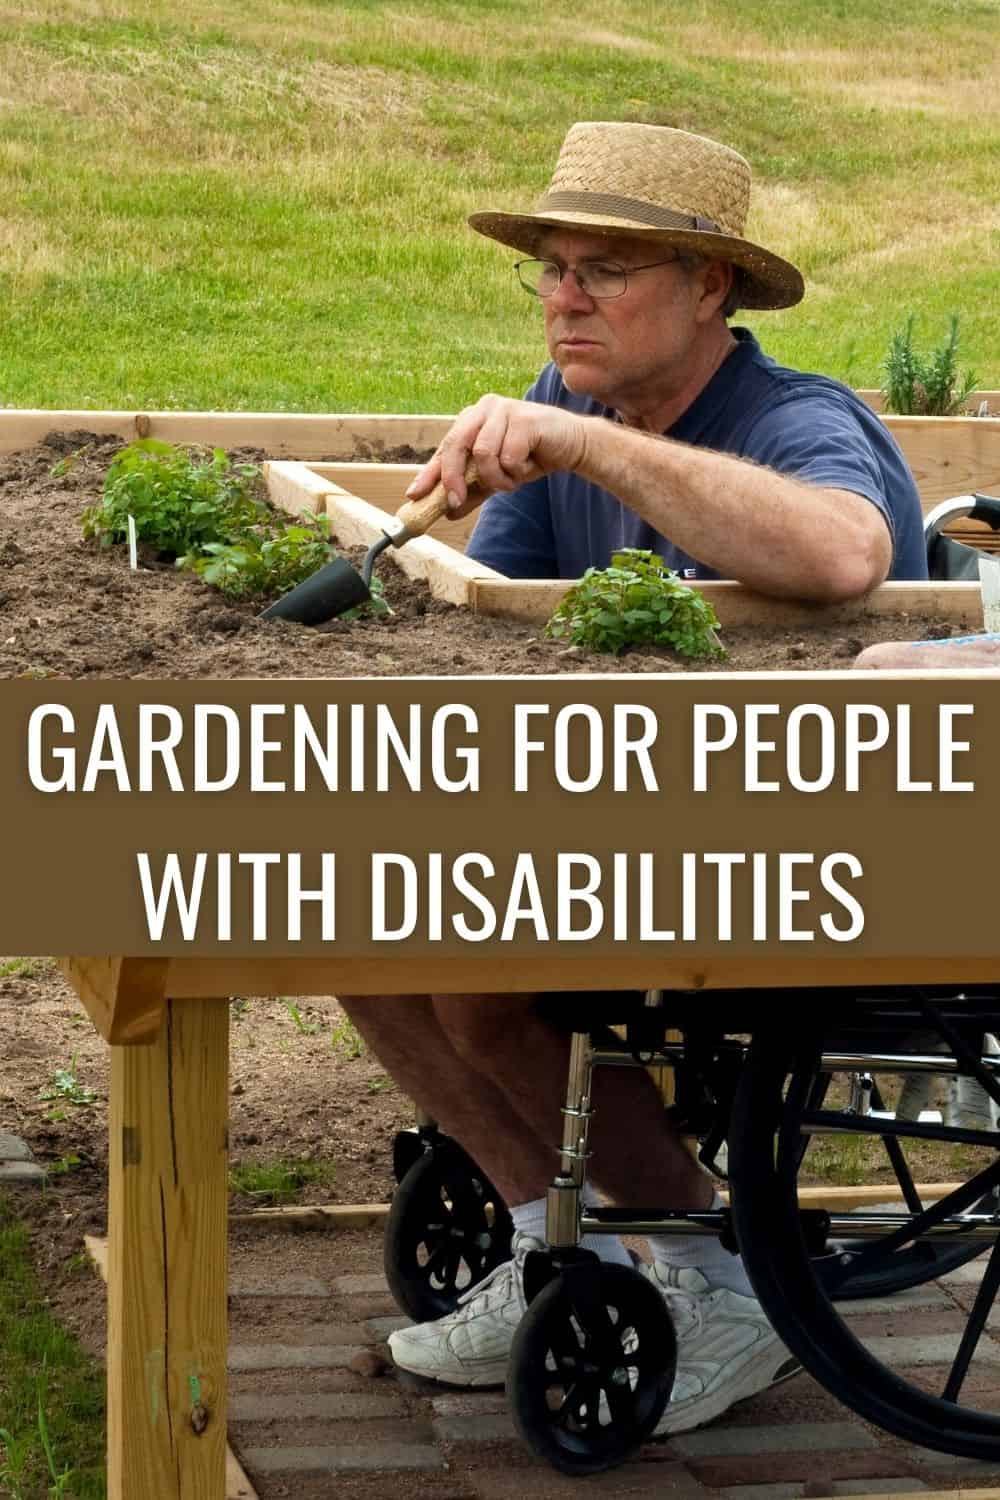 Gardening for people with disabilities